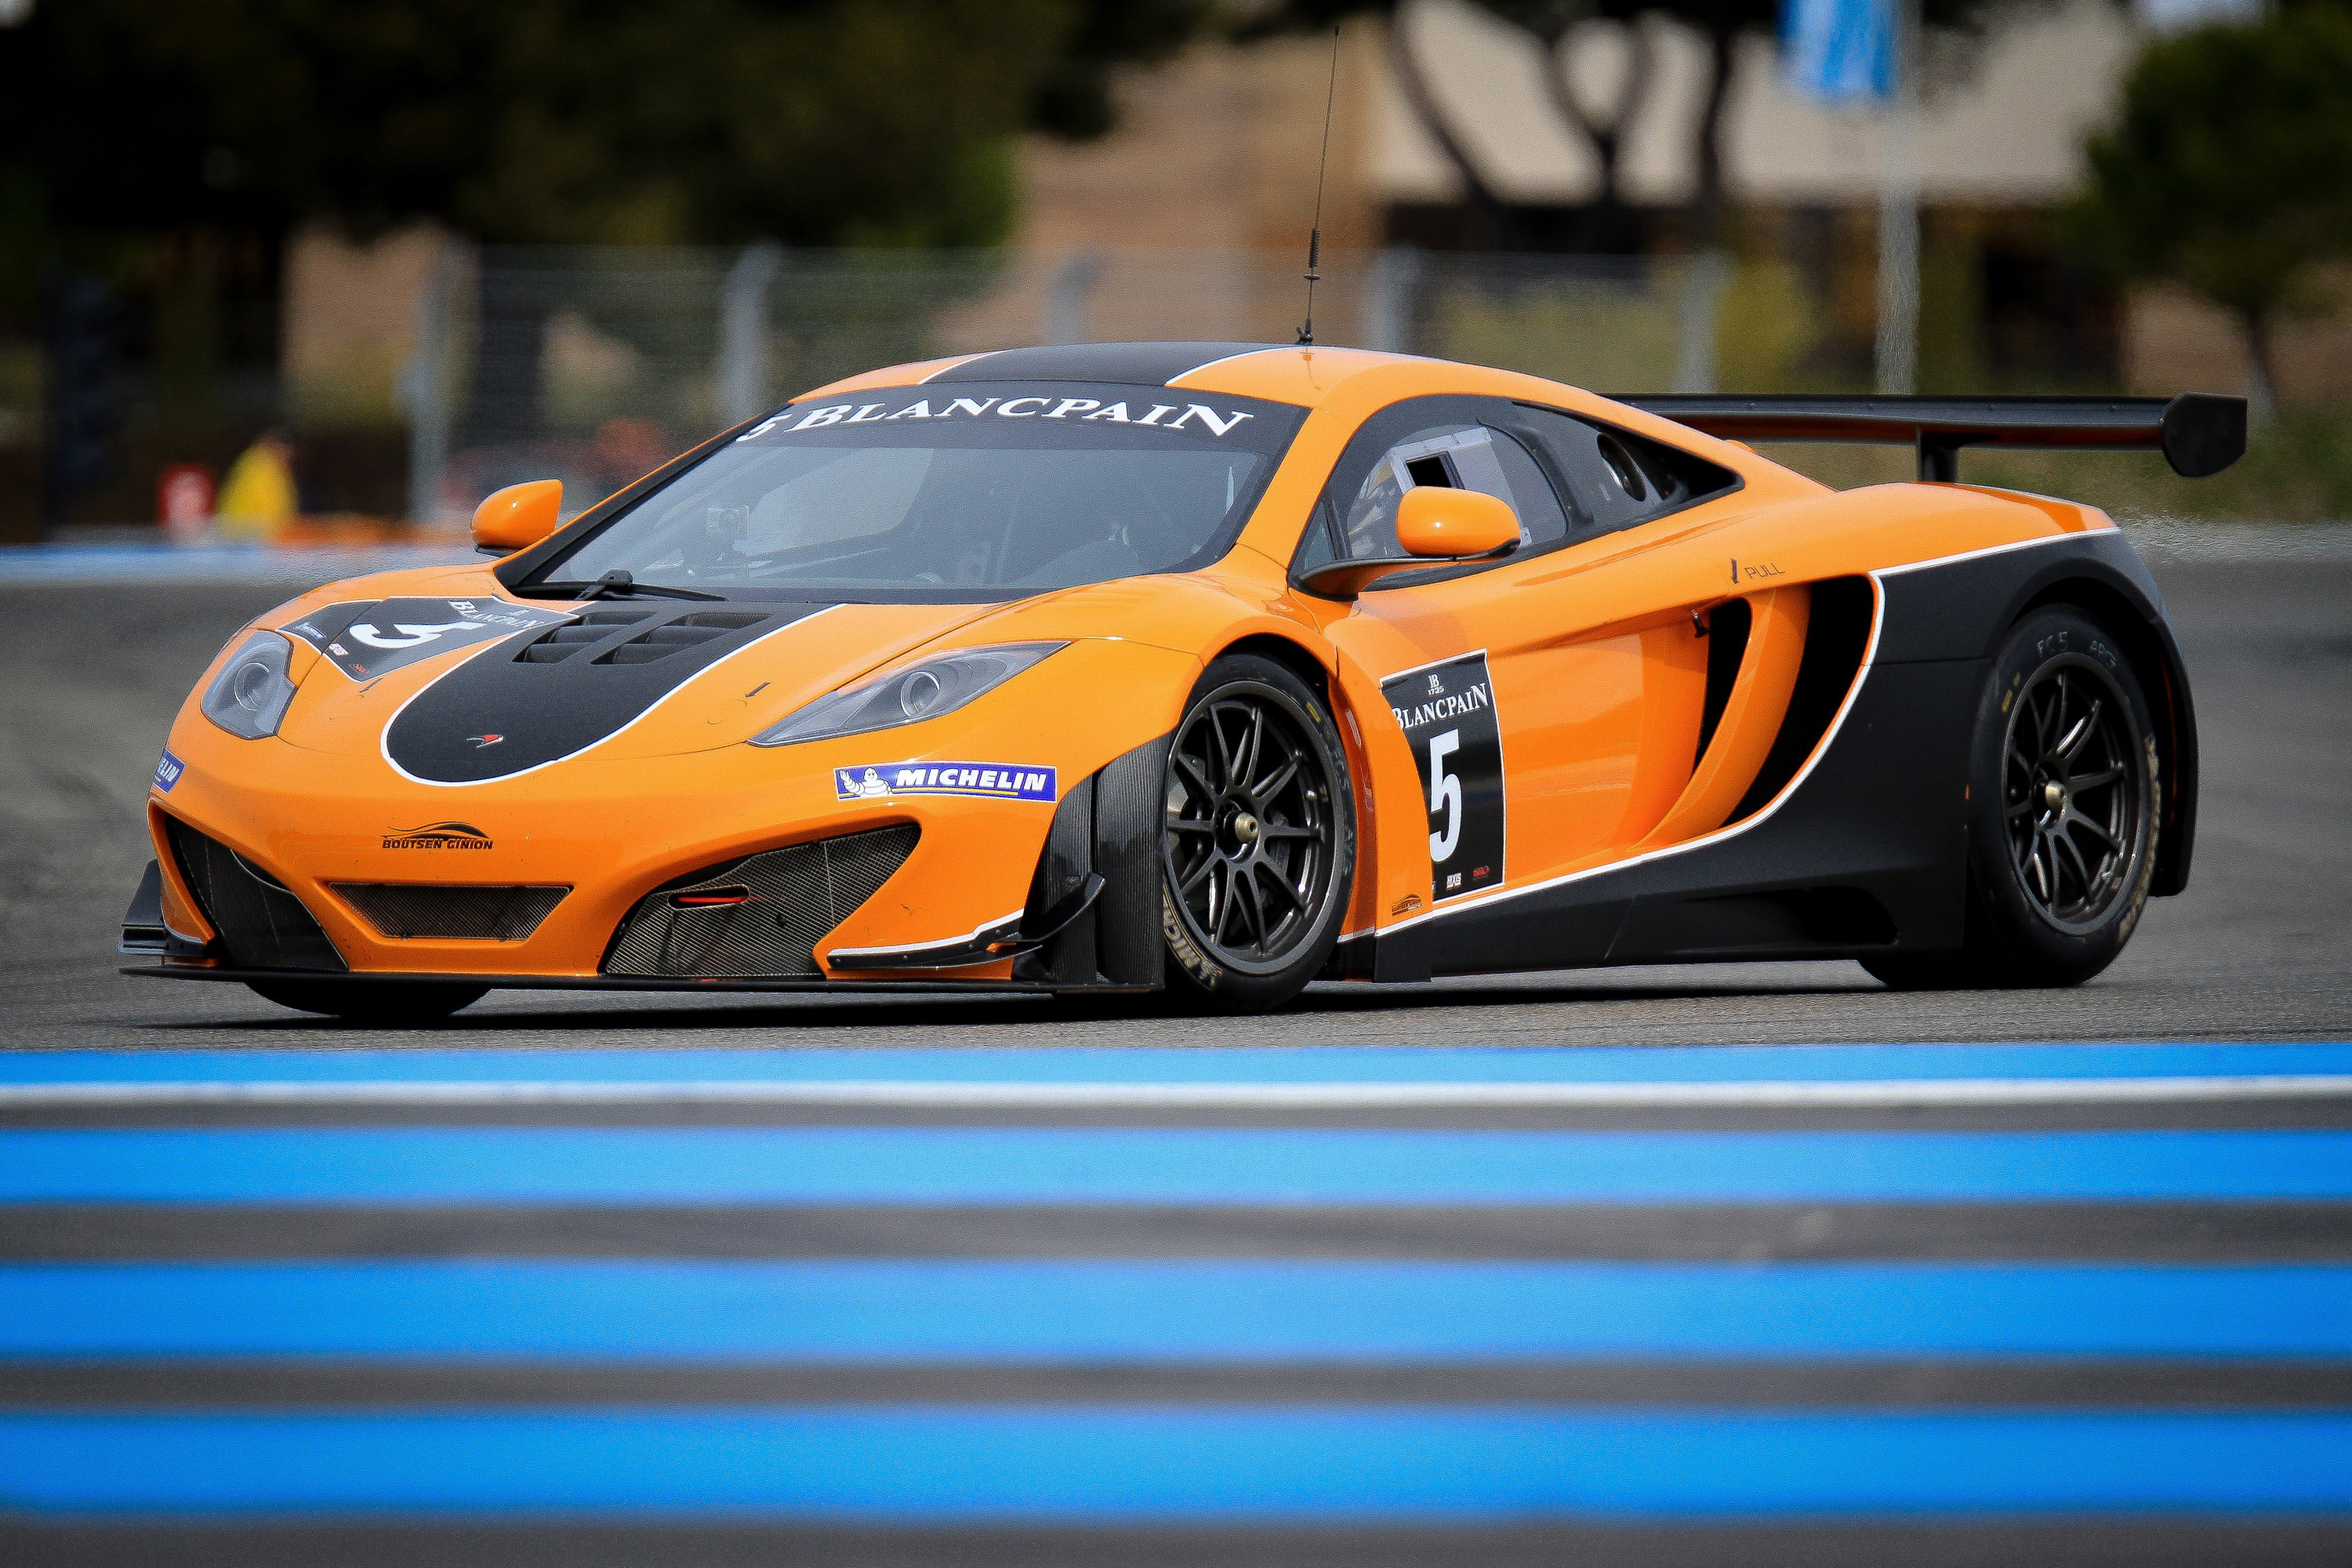 McLaren MP4-12C GT3 at the race track